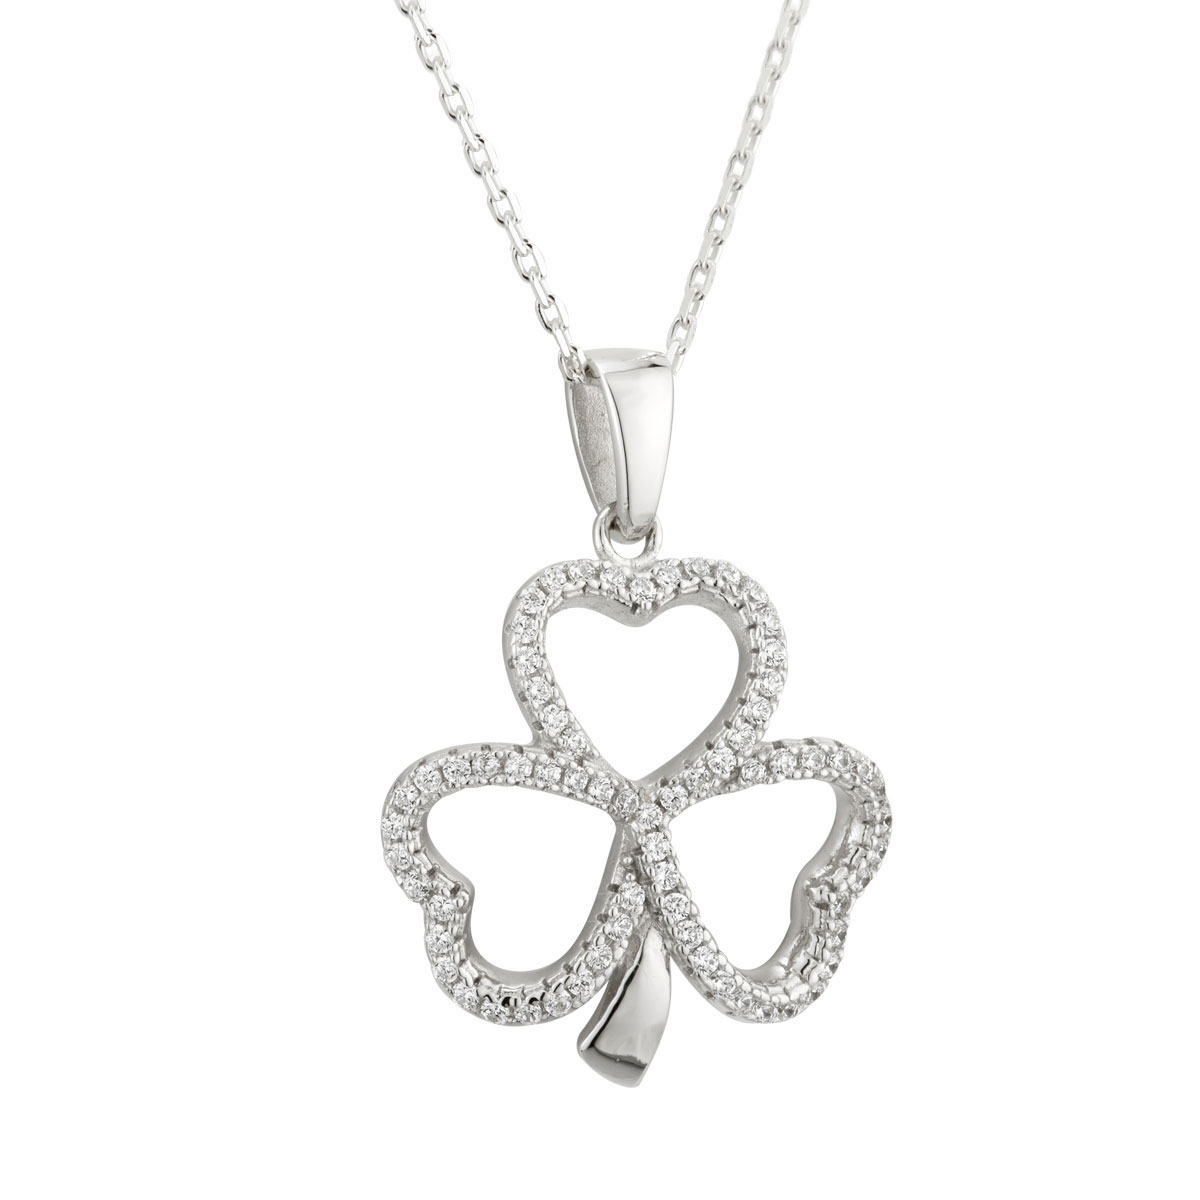 Cashs Ireland, Crystal Pave and Sterling Silver Shamrock Pendant Necklace